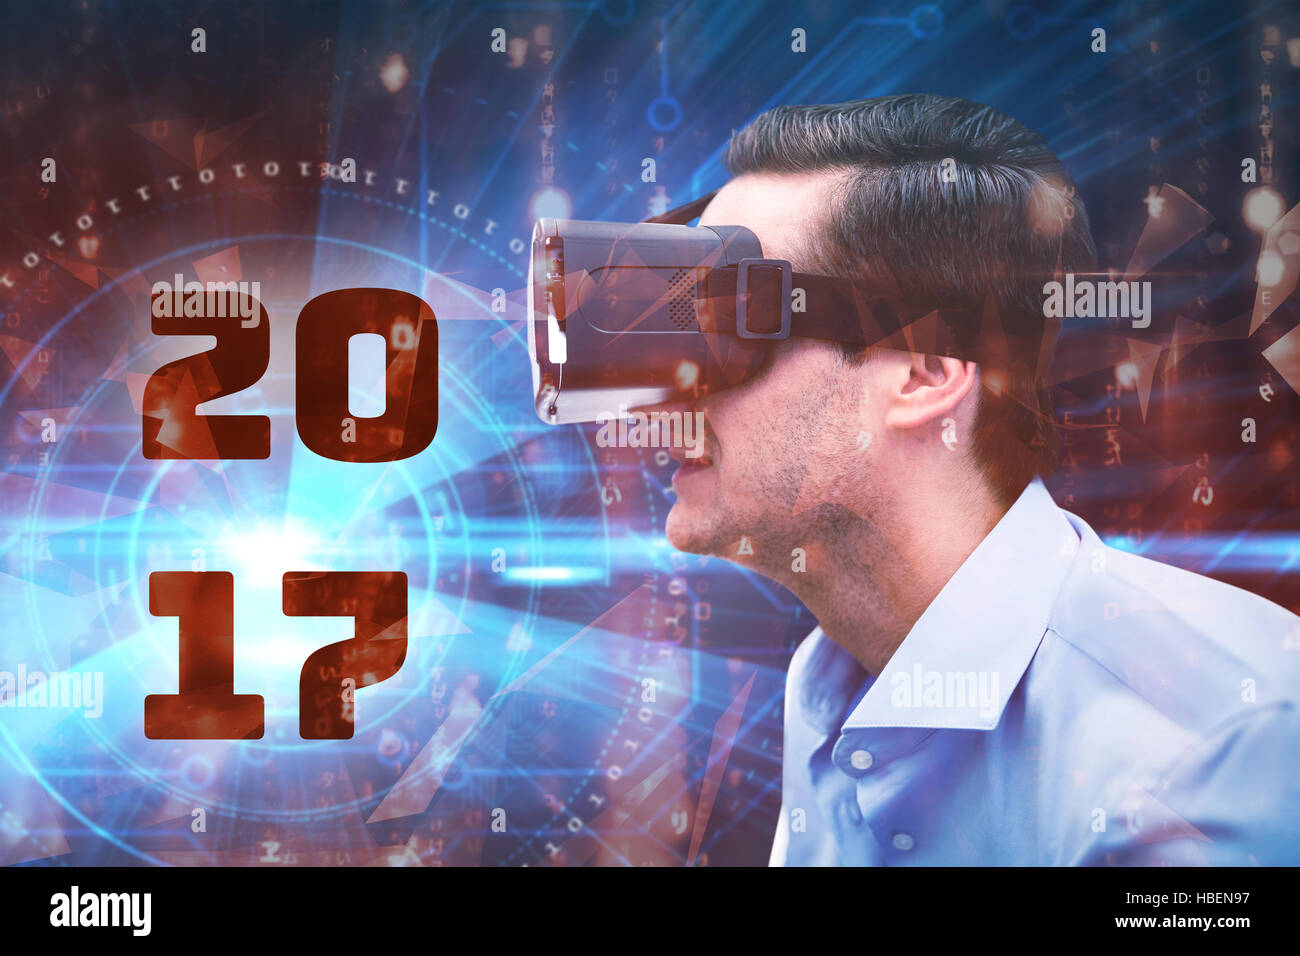 Composite image of profile view of businessman holding virtual glasses Stock Photo